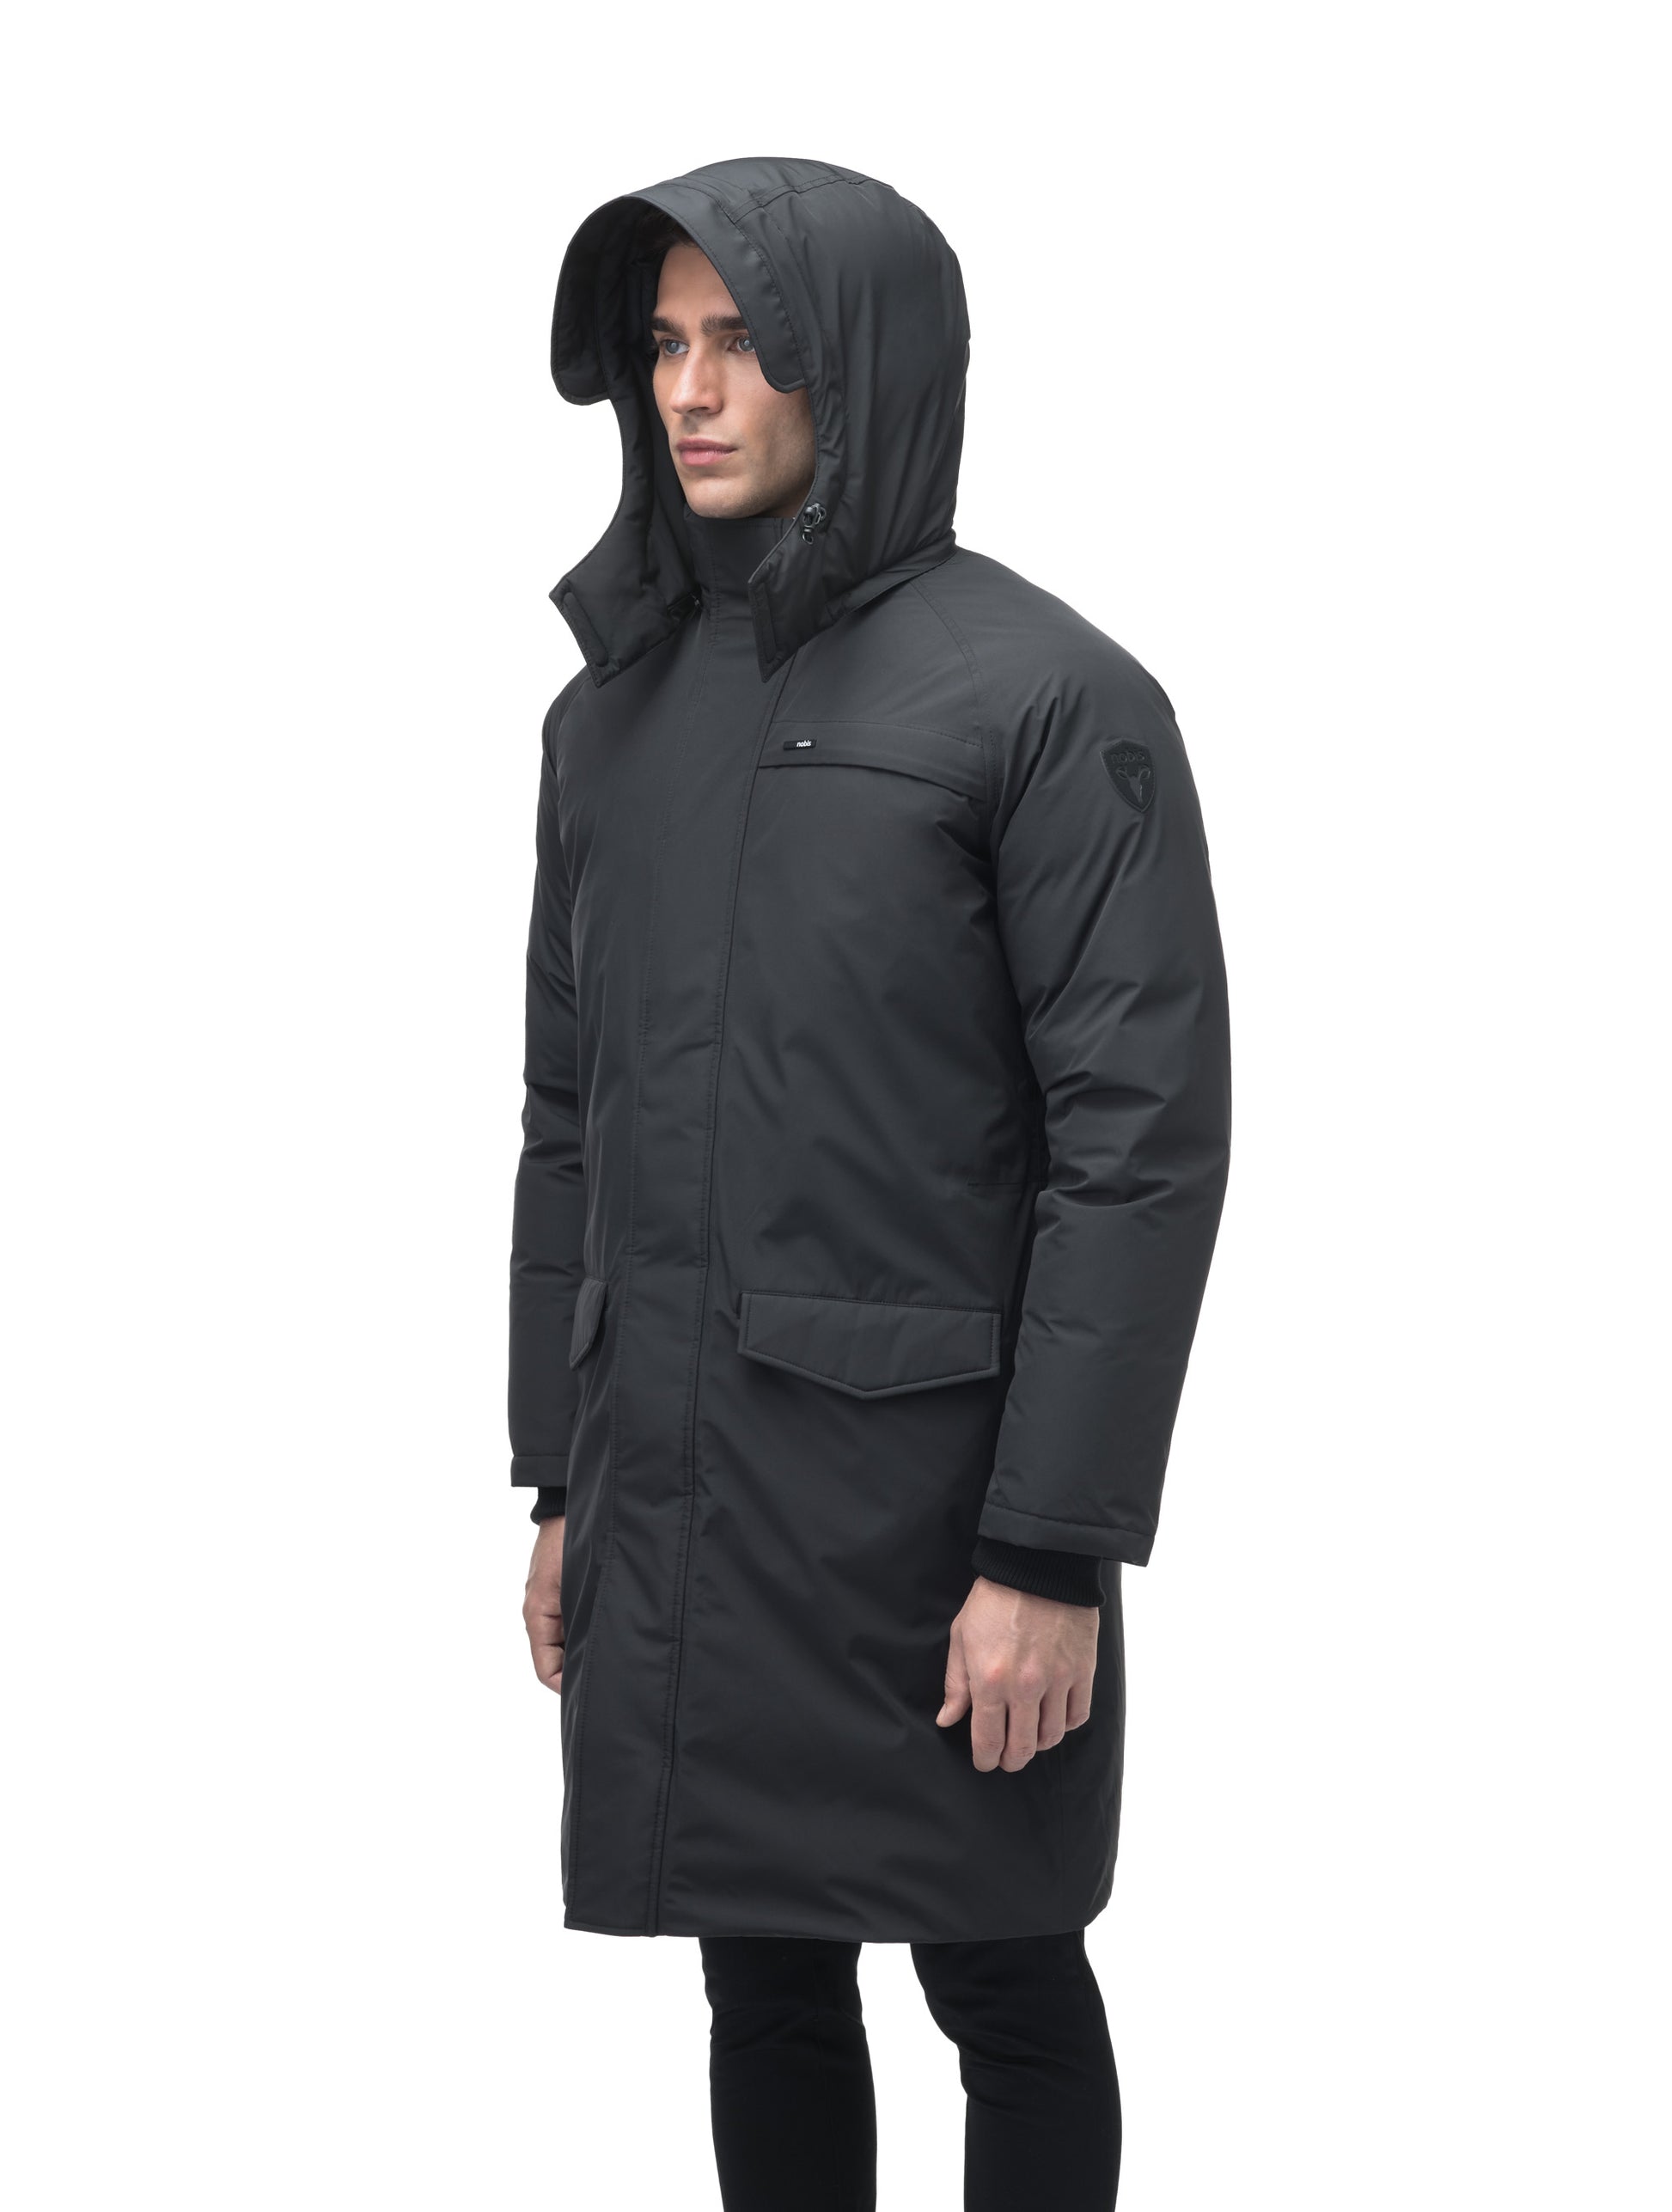 Men's knee length down-filled parka with removable hood in Black